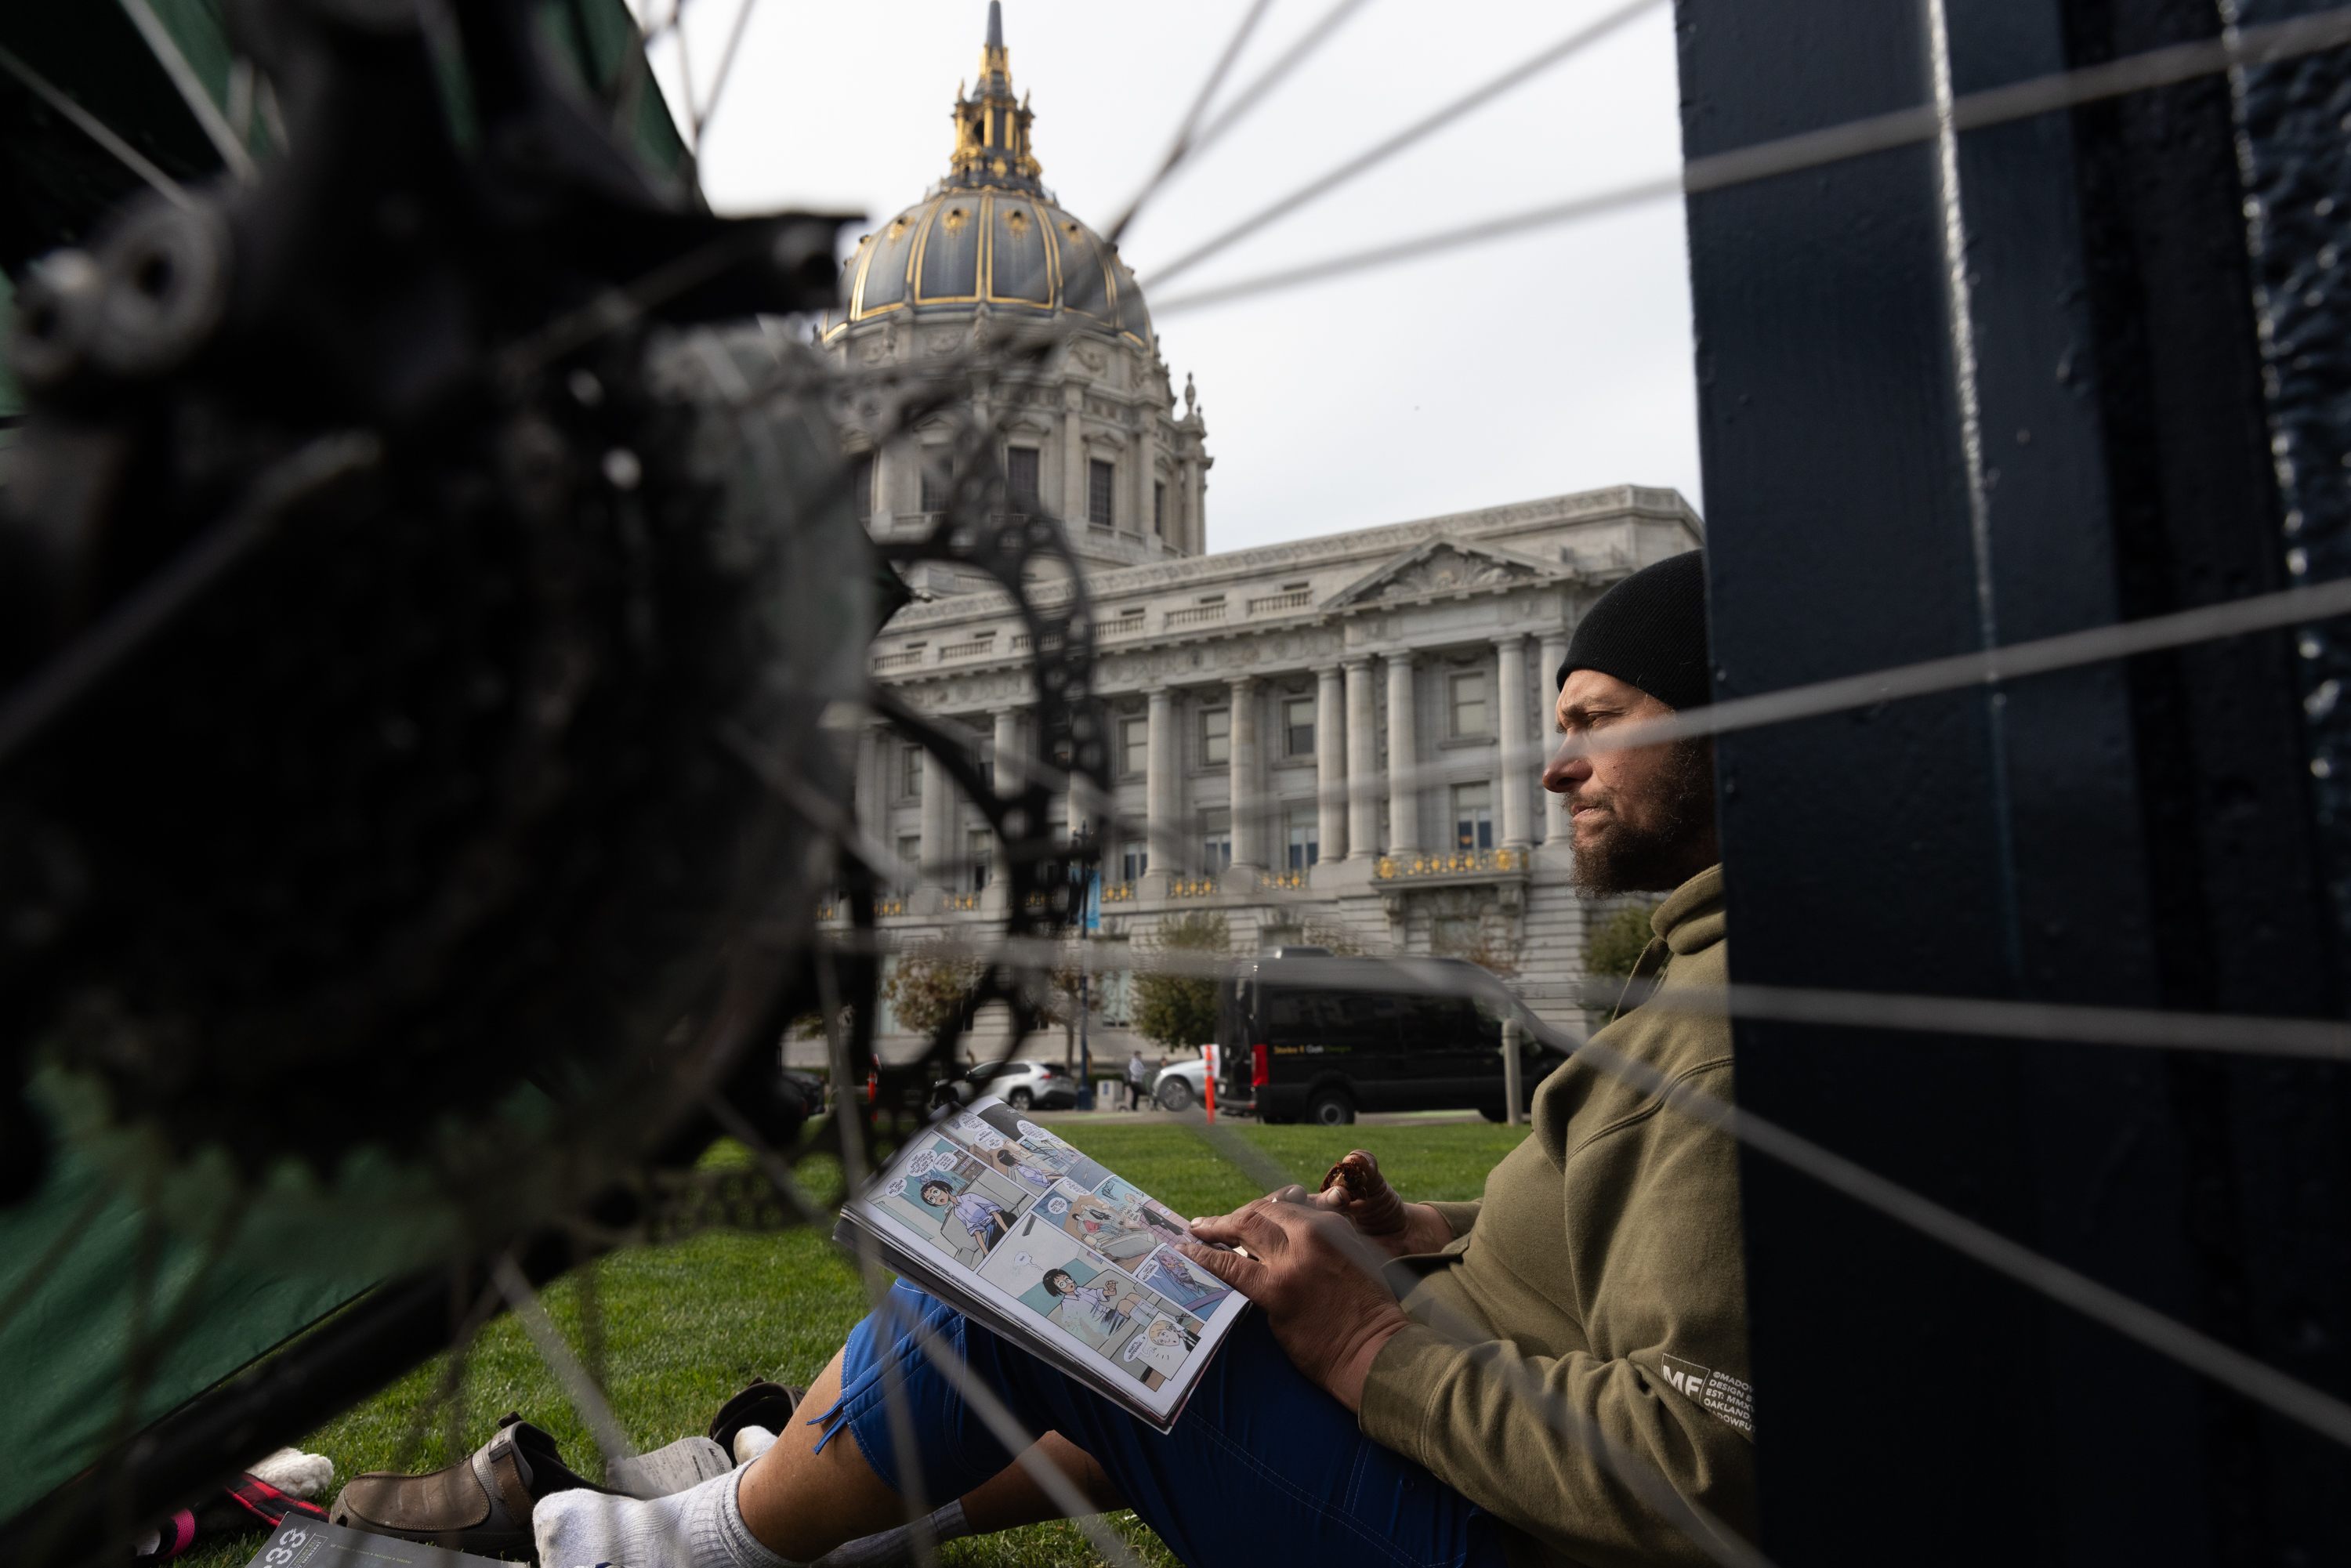 A man sits on the grass infront of City Hall and a bike wheel in the foreground.